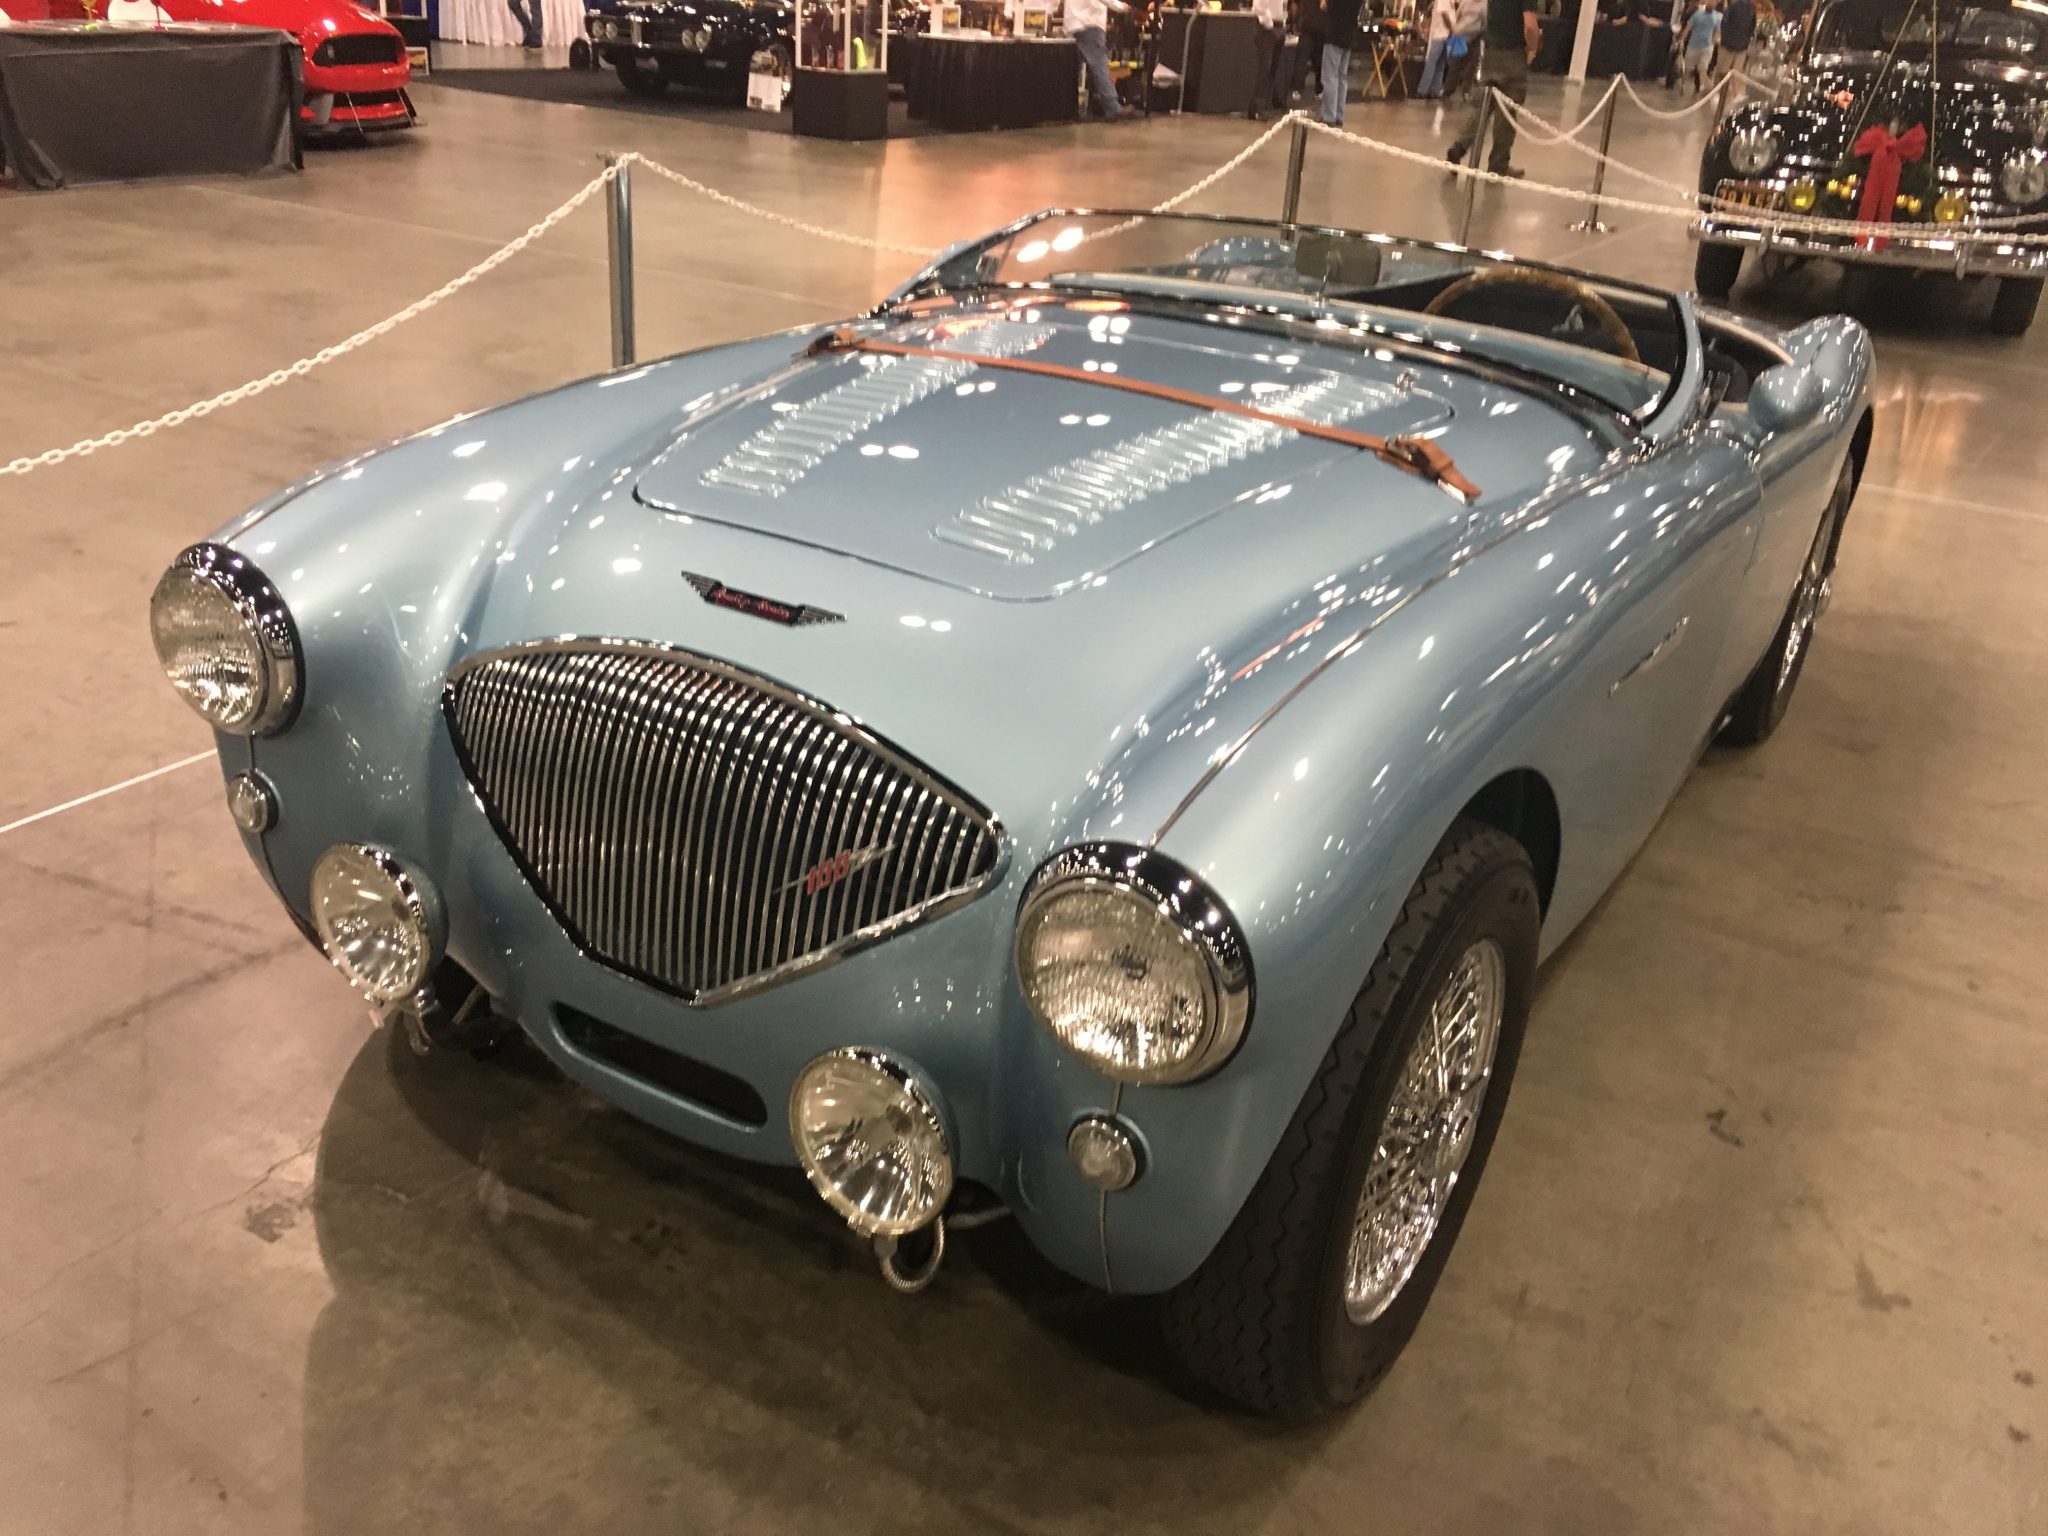 Classic English sports car, the 1956 Austin Healey 100 convertible. Note the low-profile, racy windscreen.